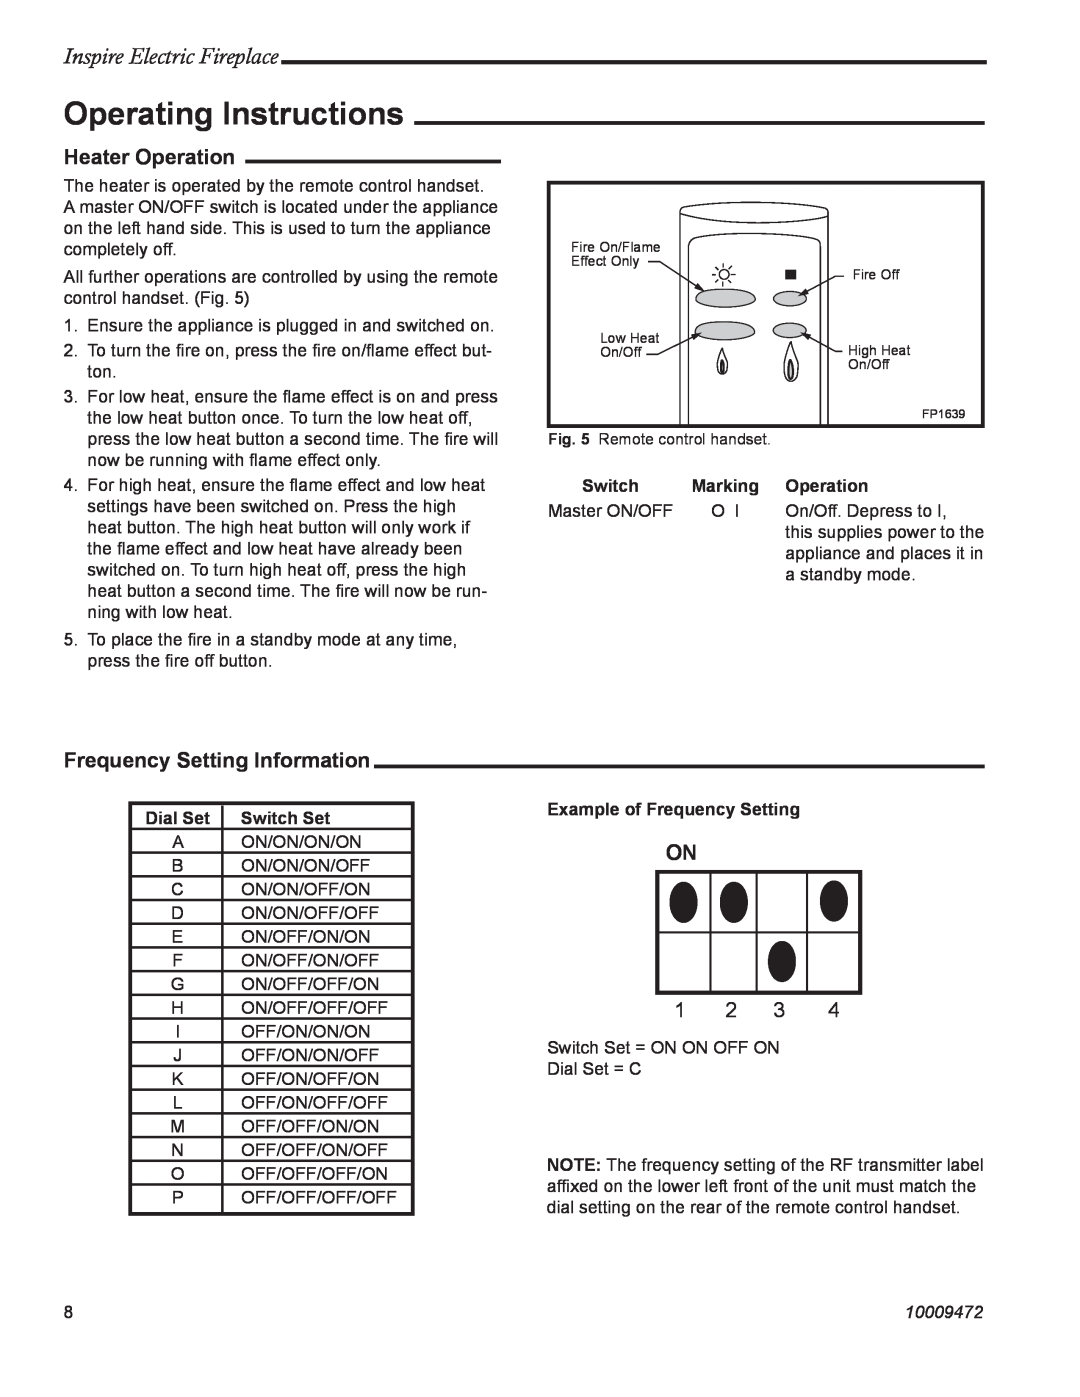 CFM Corporation ICVCEFP01 manual Operating Instructions, Inspire Electric Fireplace, Heater Operation, 10009472 